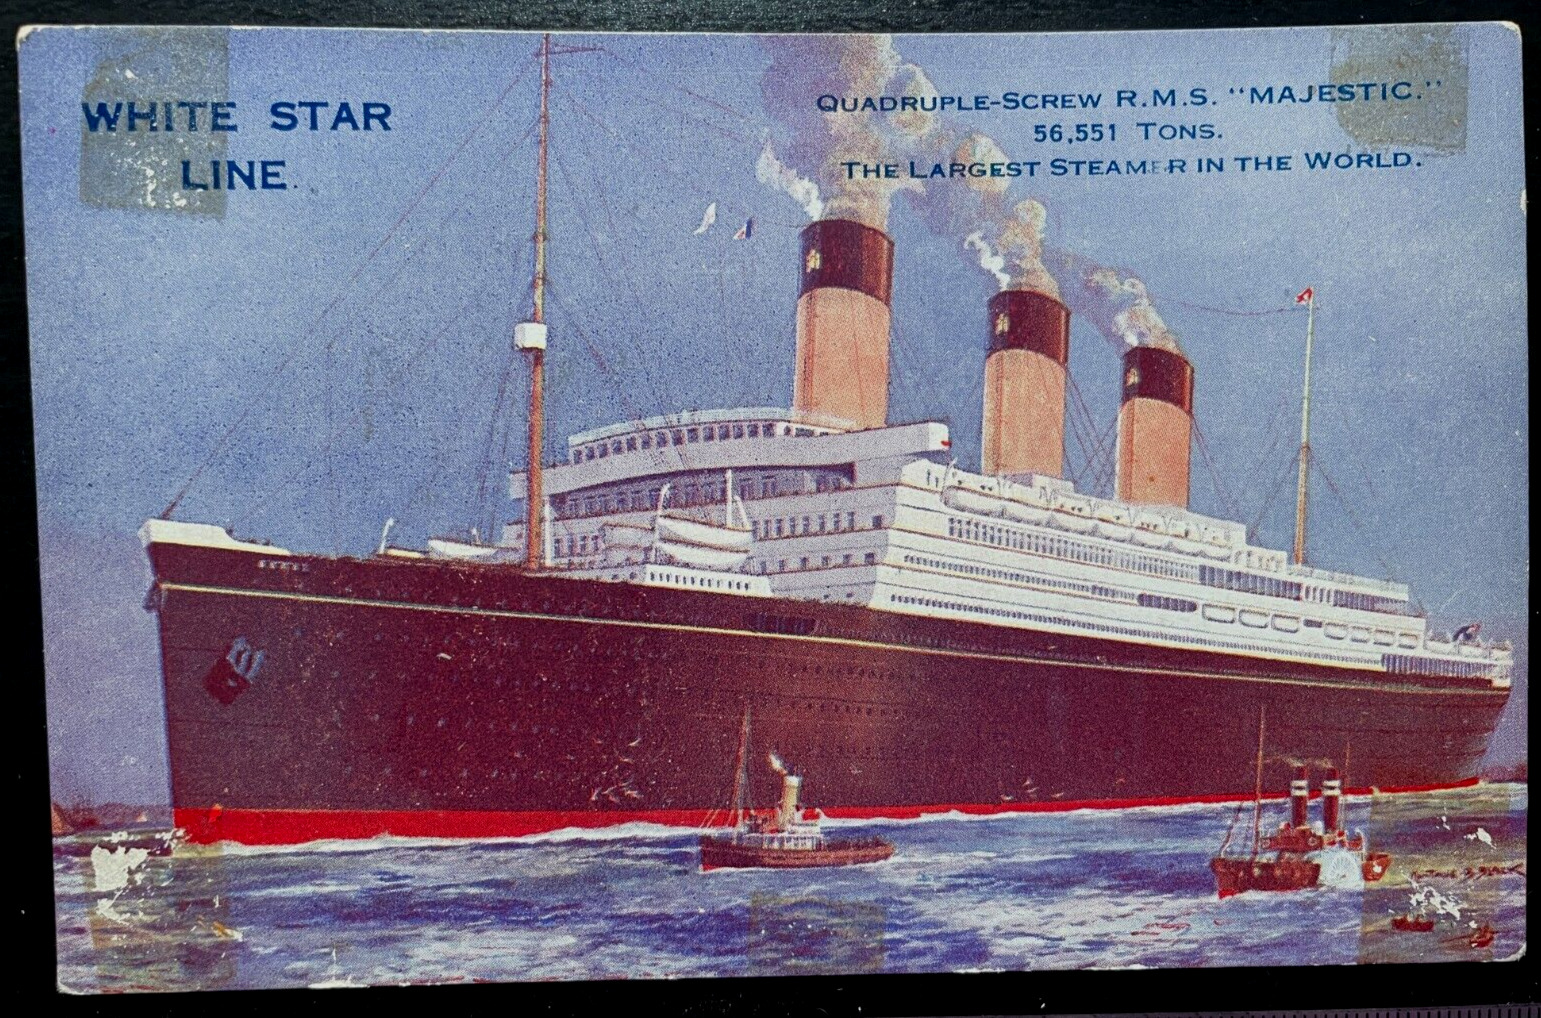 Vintage Postcard 1920s White Star Line, RMS Majestic, Largest Steamer in World